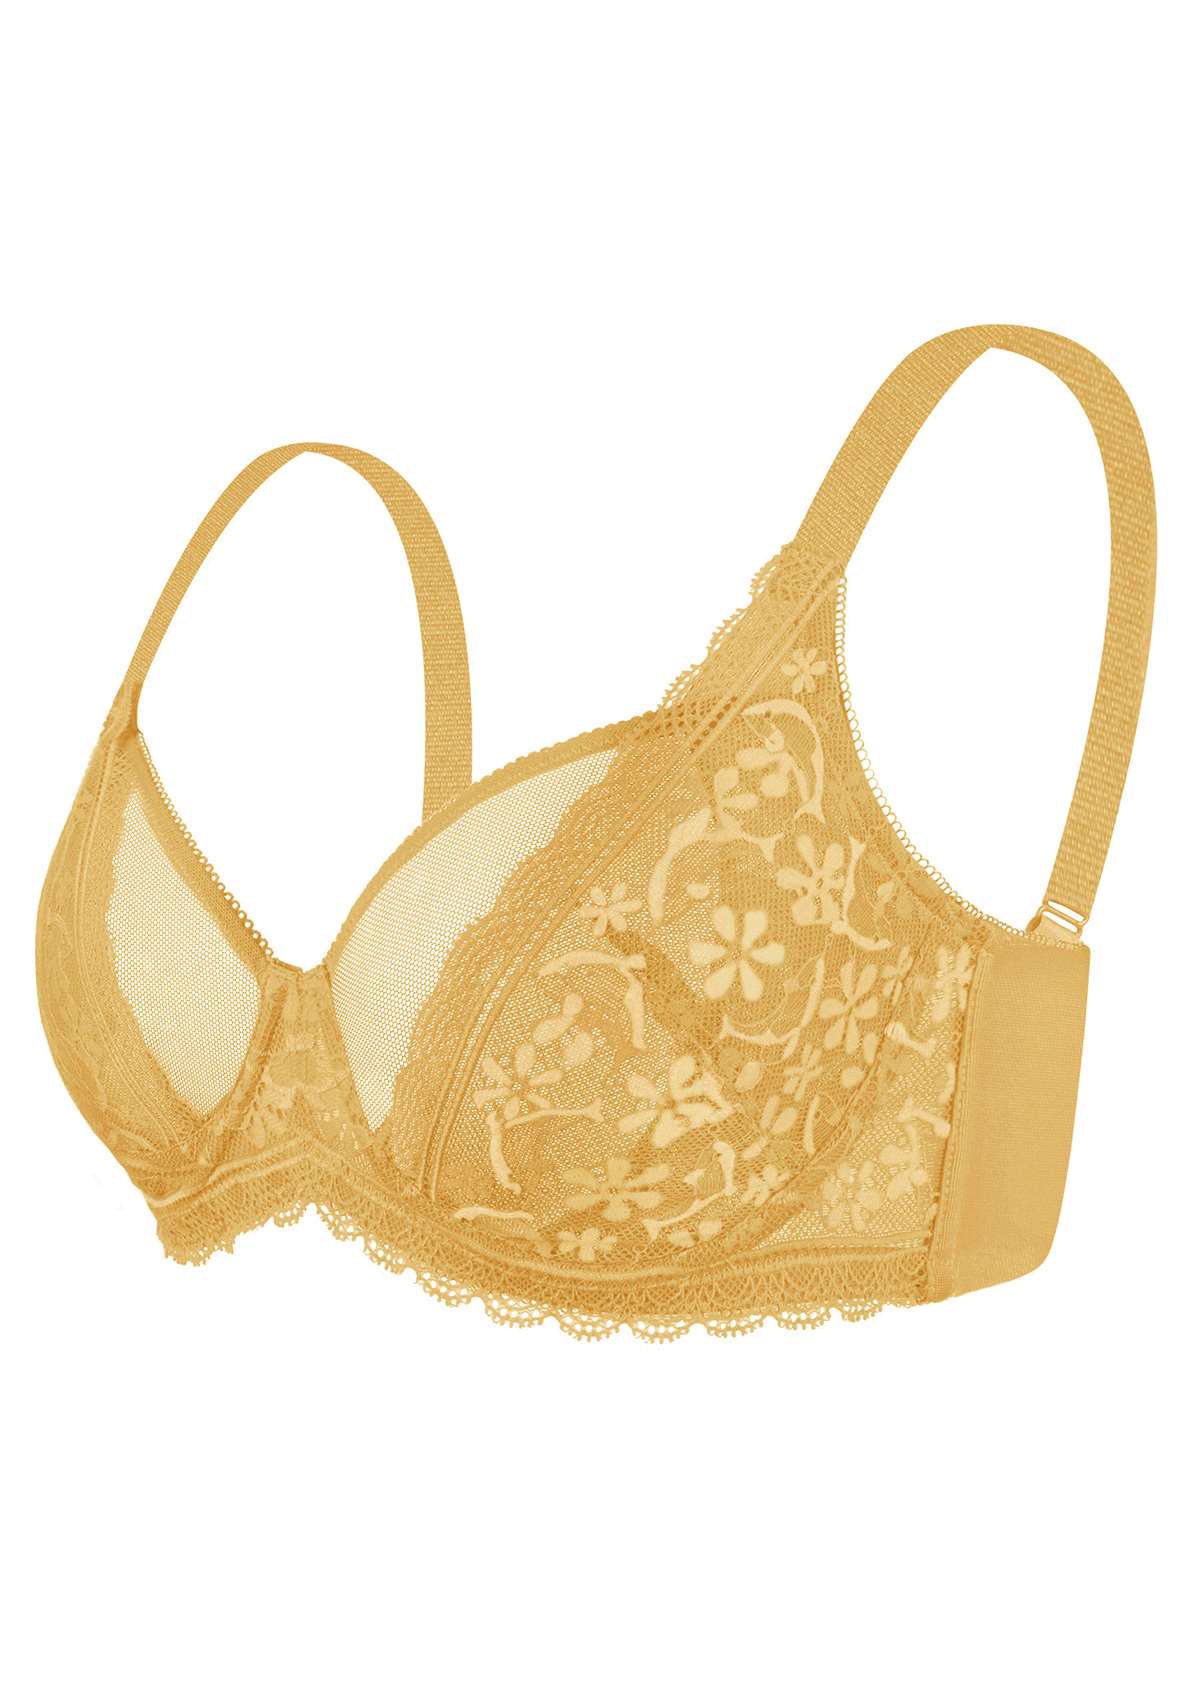 HSIA Anemone Lace Unlined Bra: Supportive, Lightweight Bra - Champagne / 42 / D